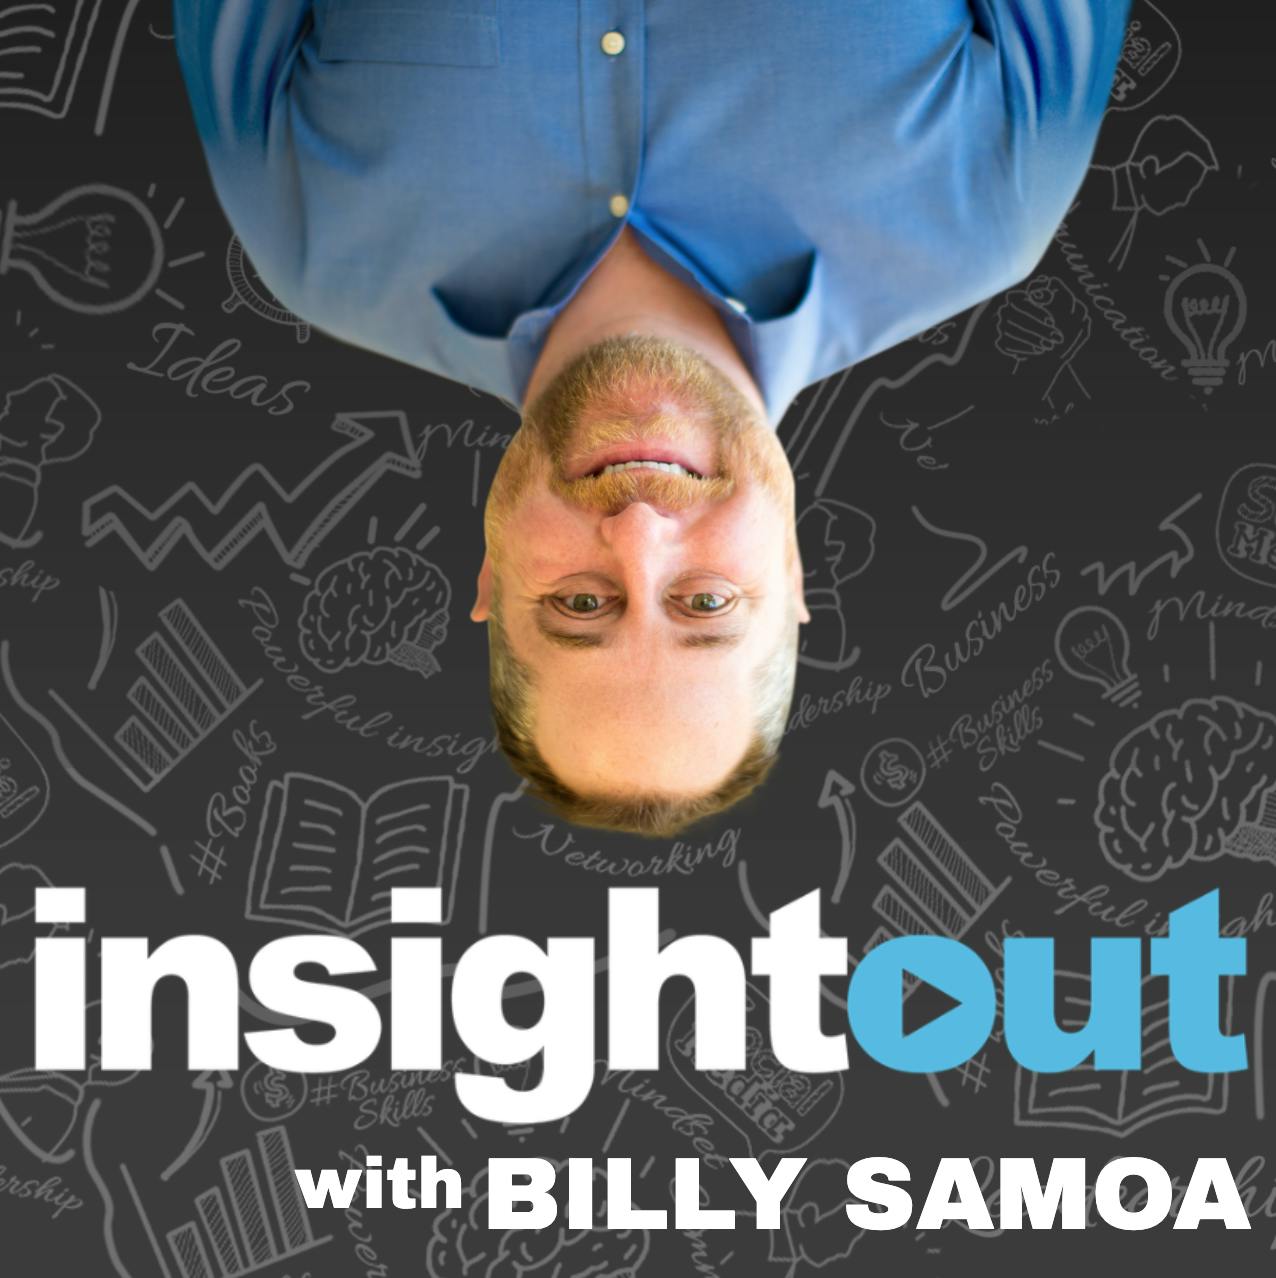 Insight Out with Billy Samoa